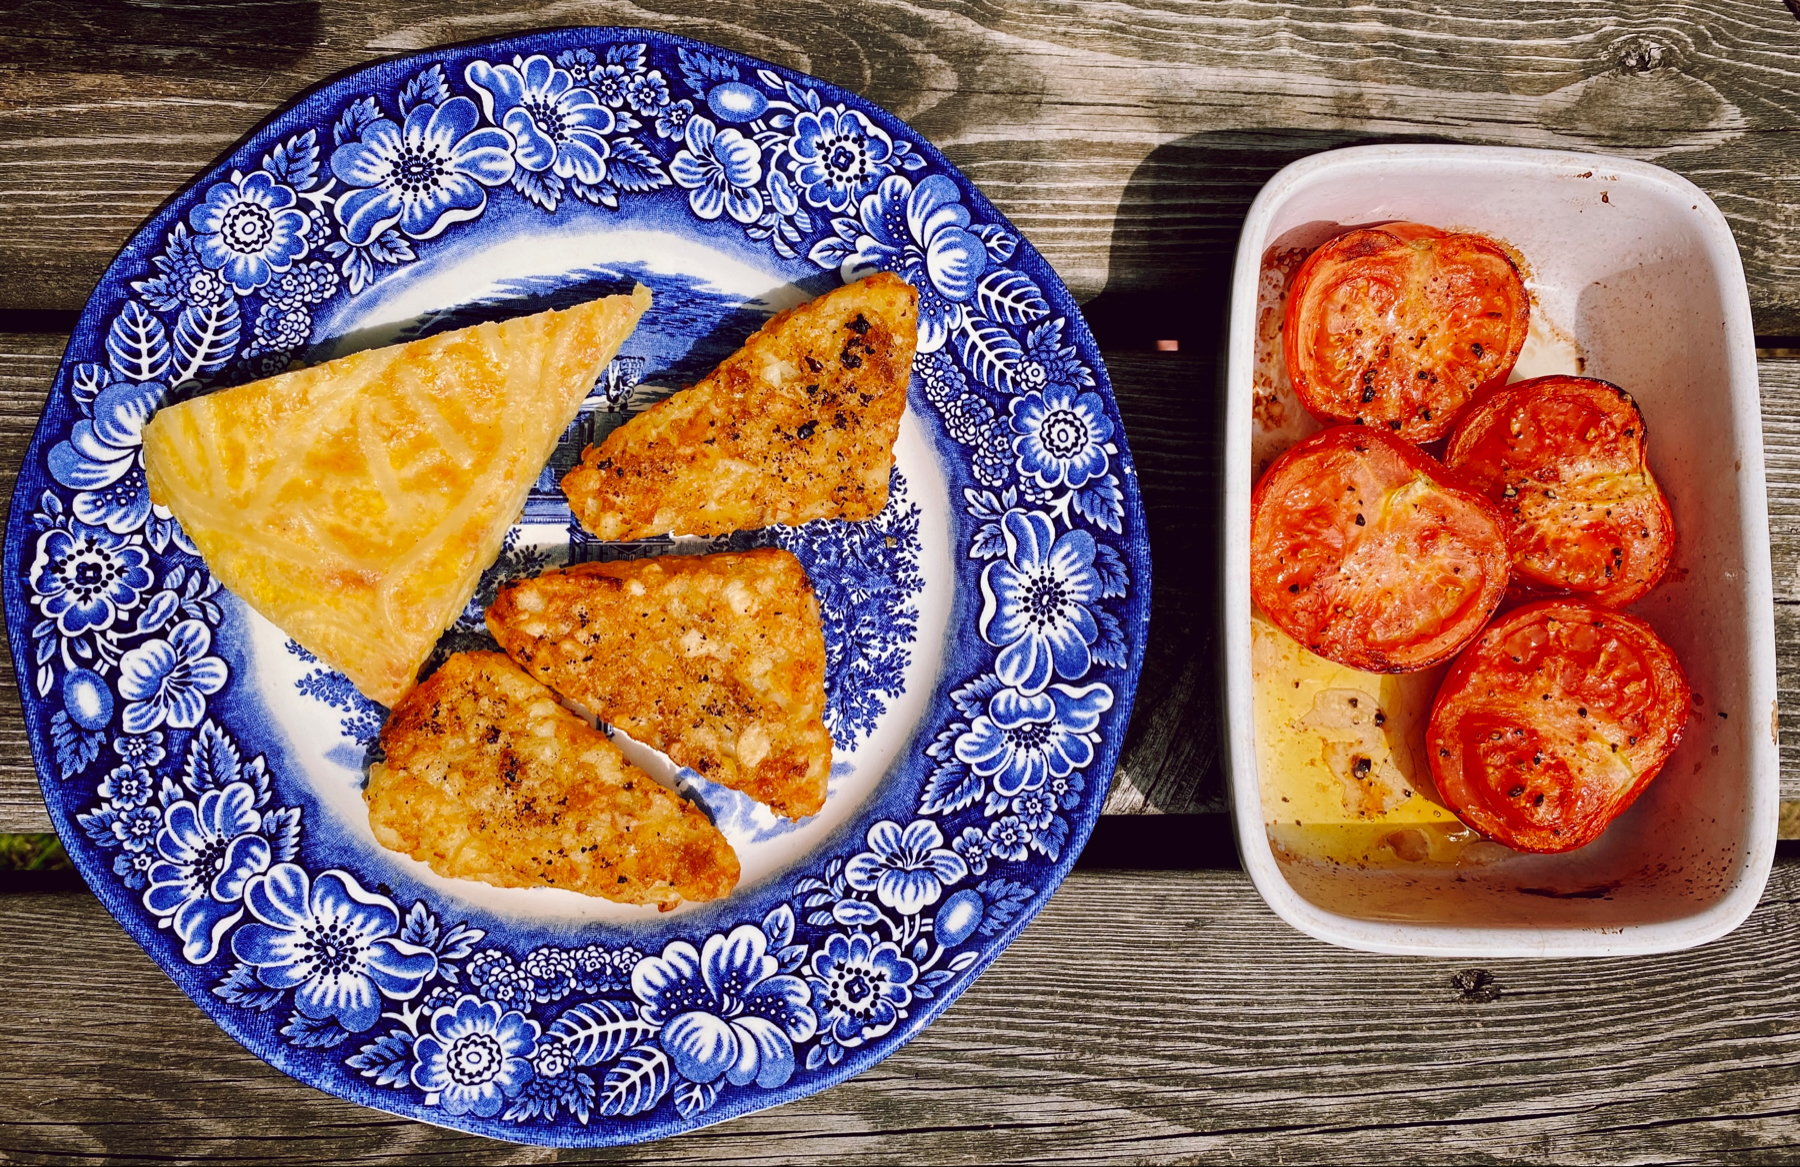 Willow pattern plate of hash browns and omelette slice next to dish of roasted tomatoes